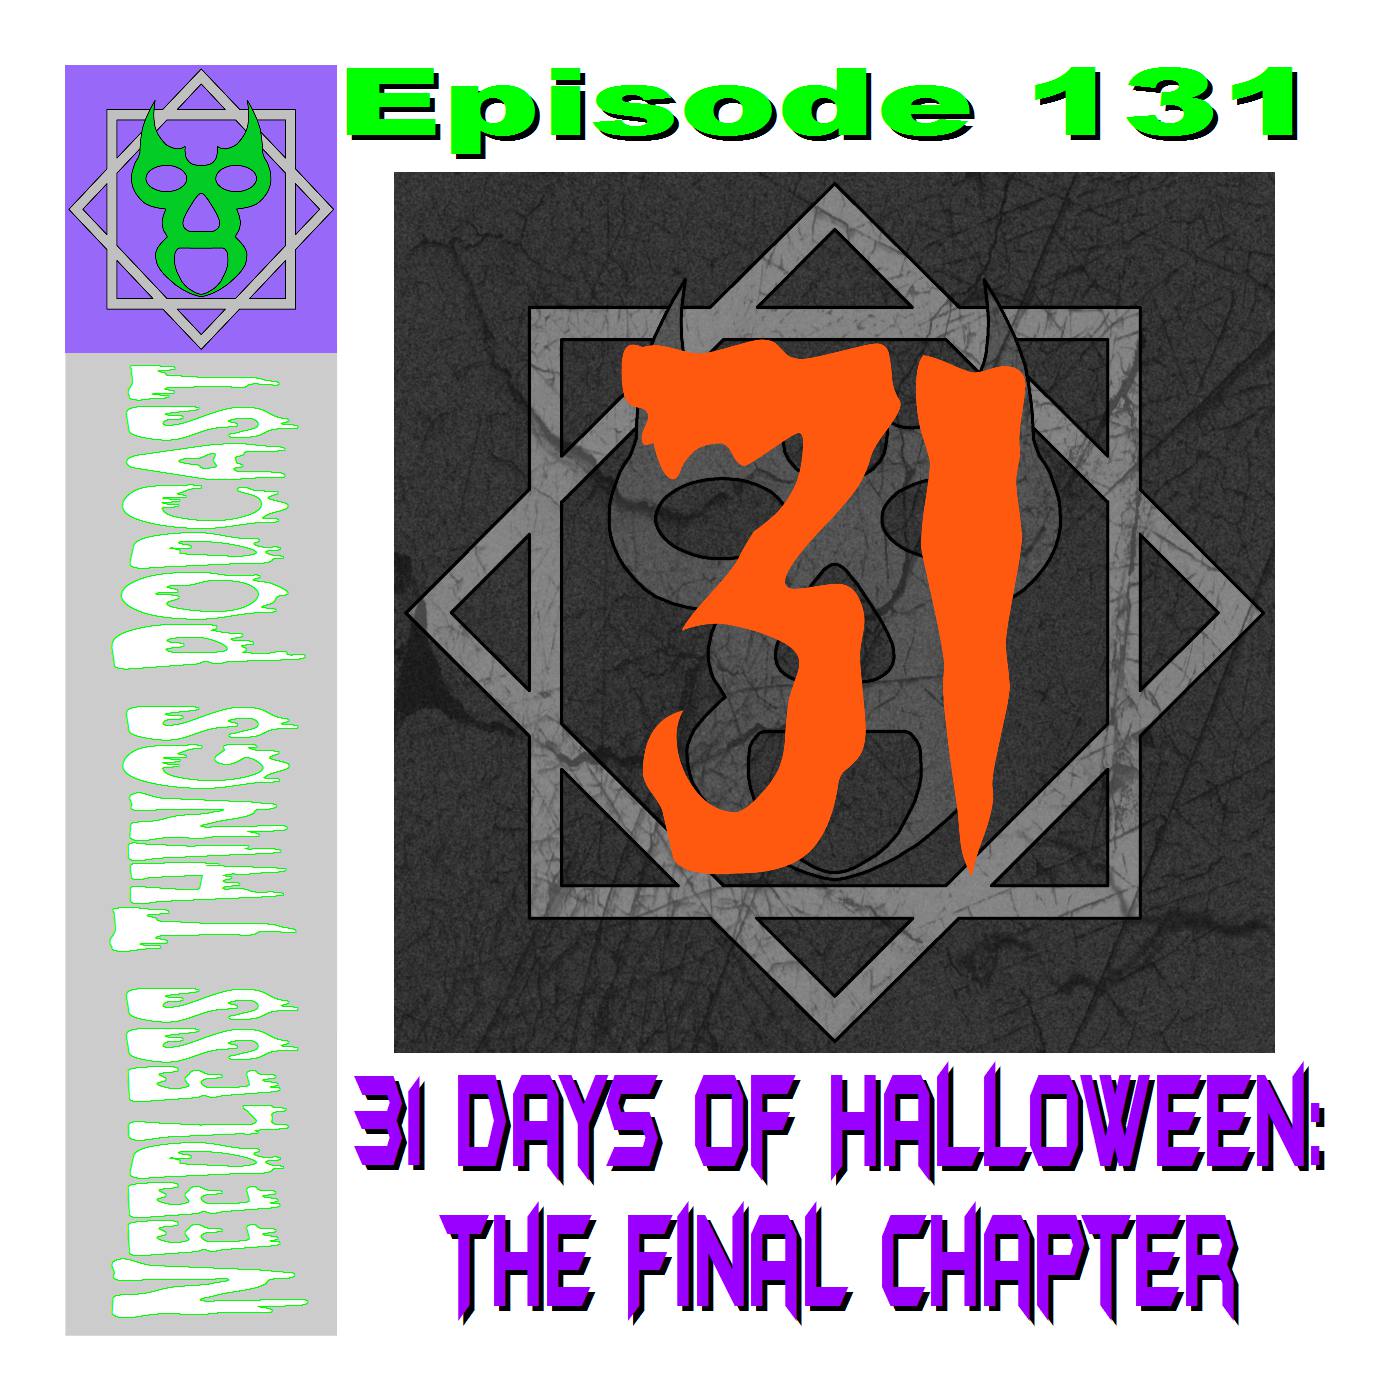 Needless Things Podcast 131 – 31 Days of Halloween – The Final Chapter